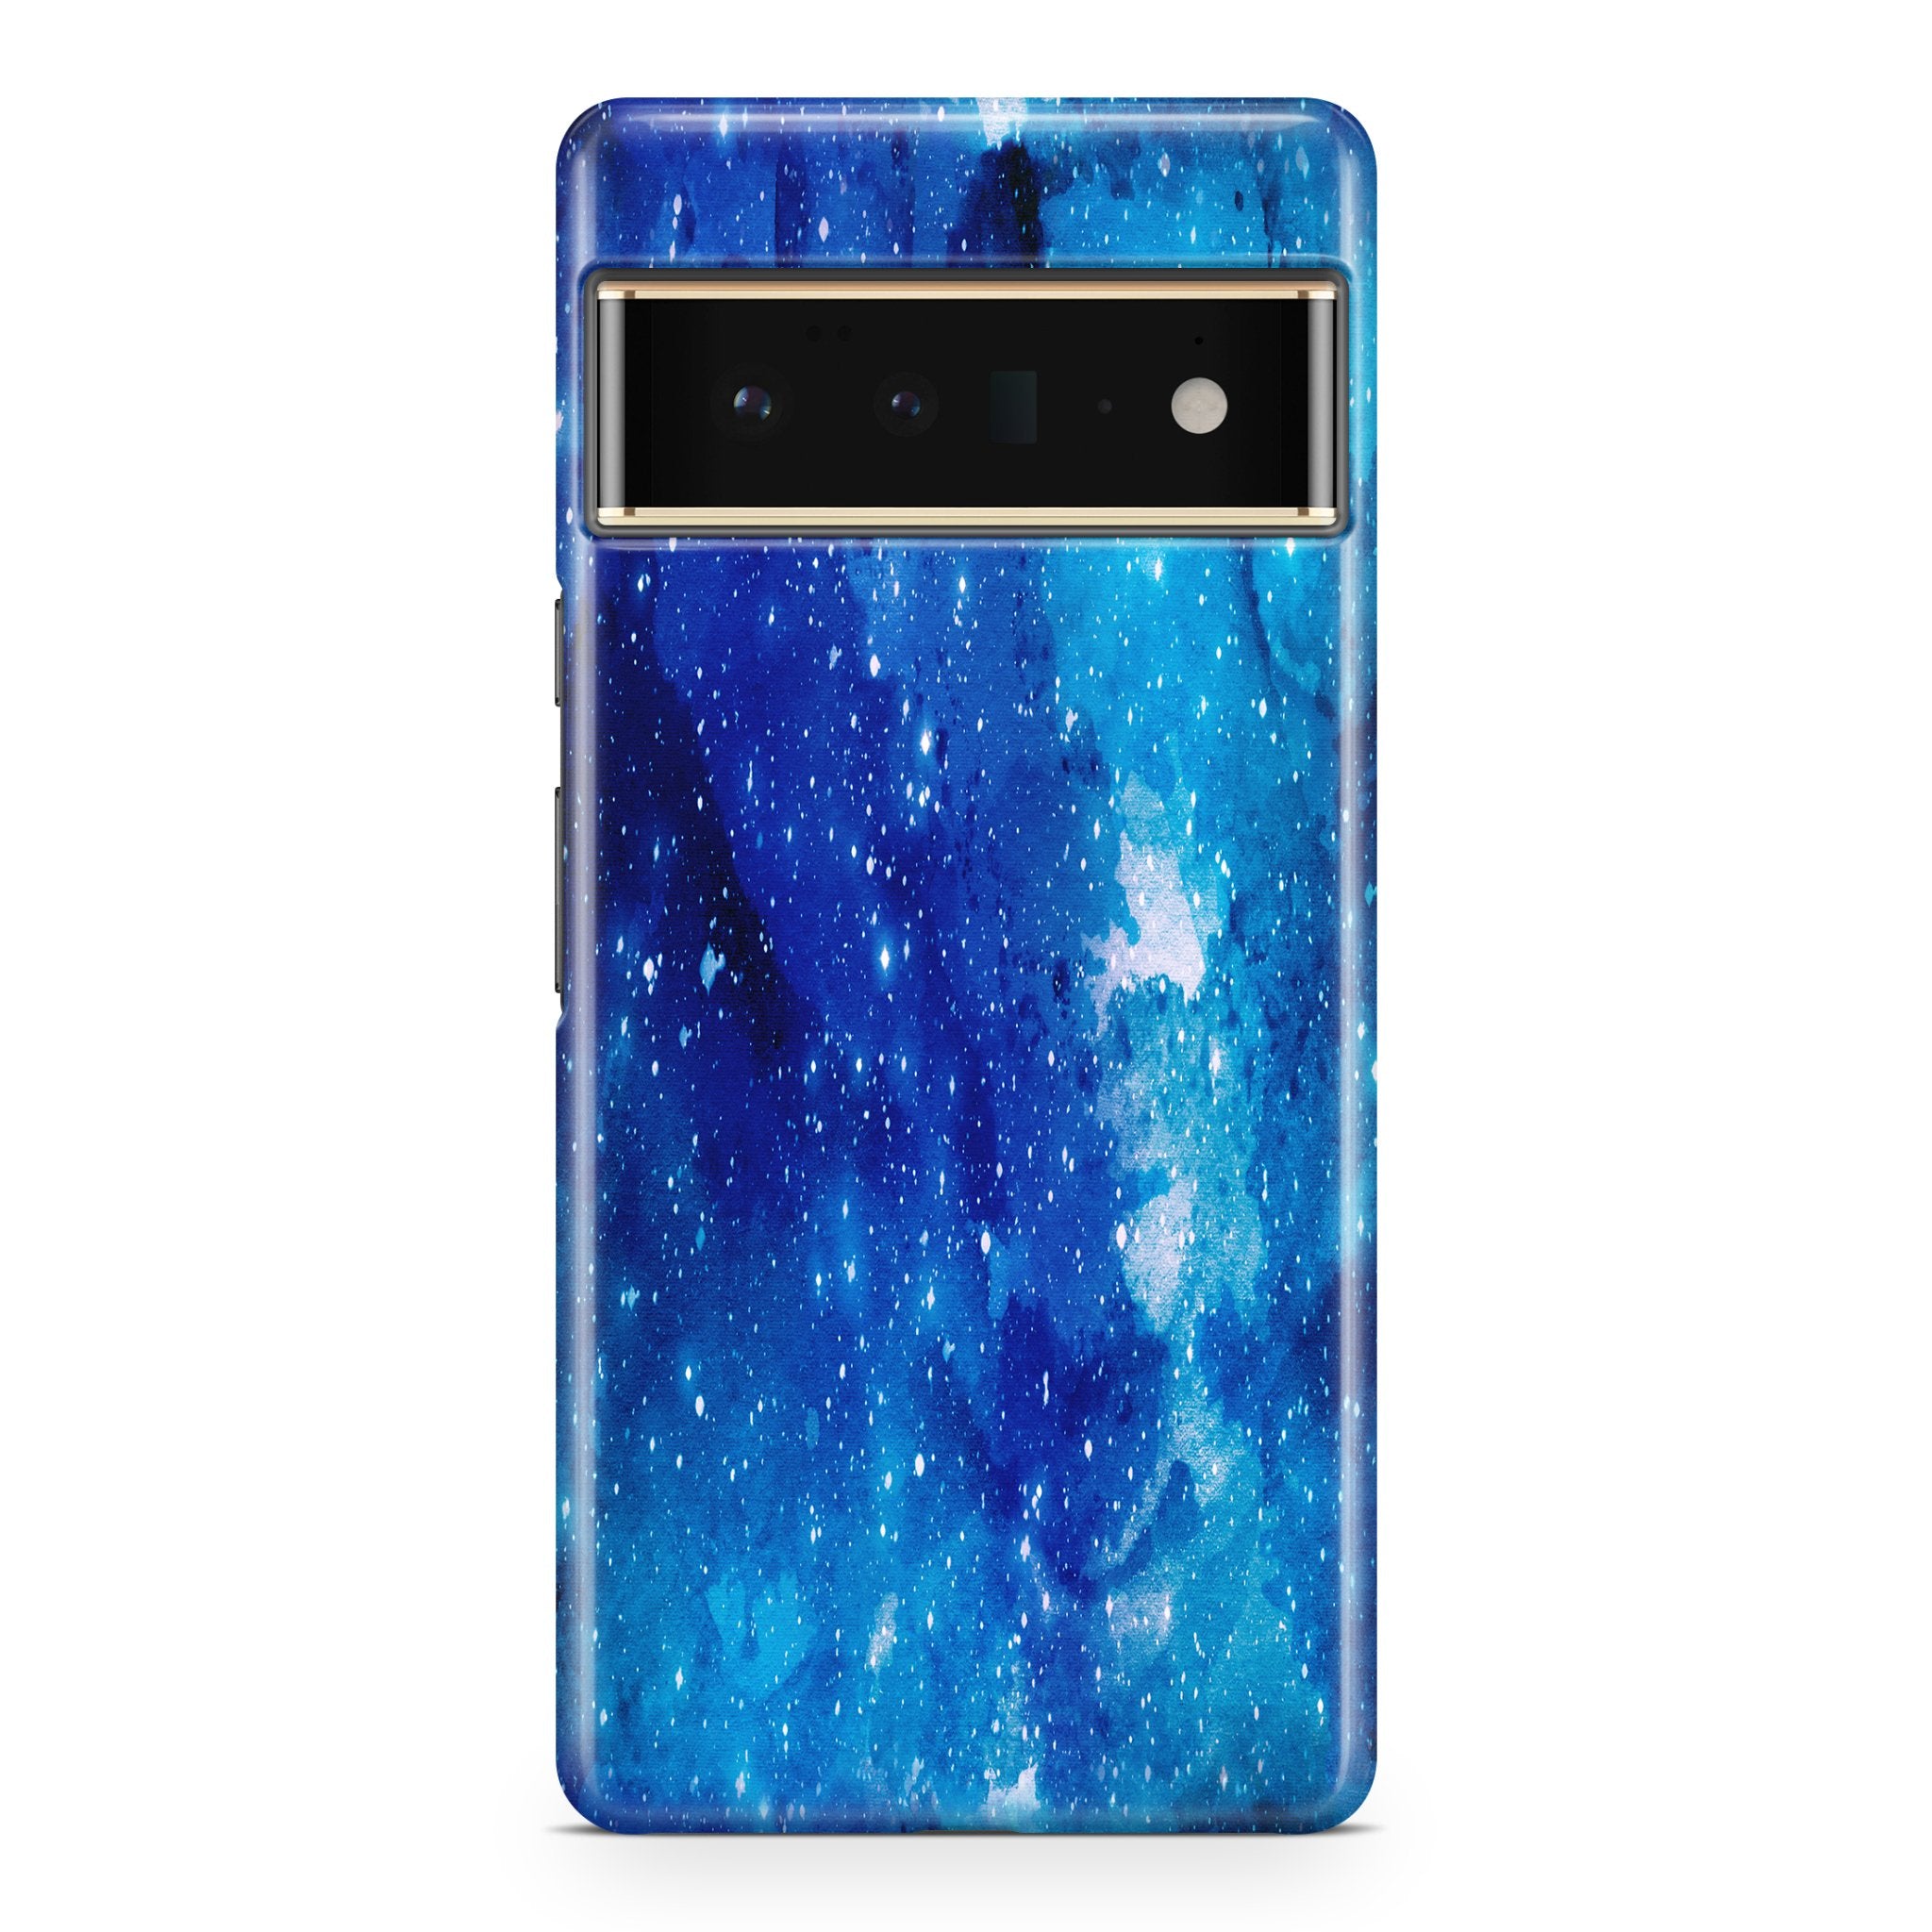 Blue Space - Google phone case designs by CaseSwagger